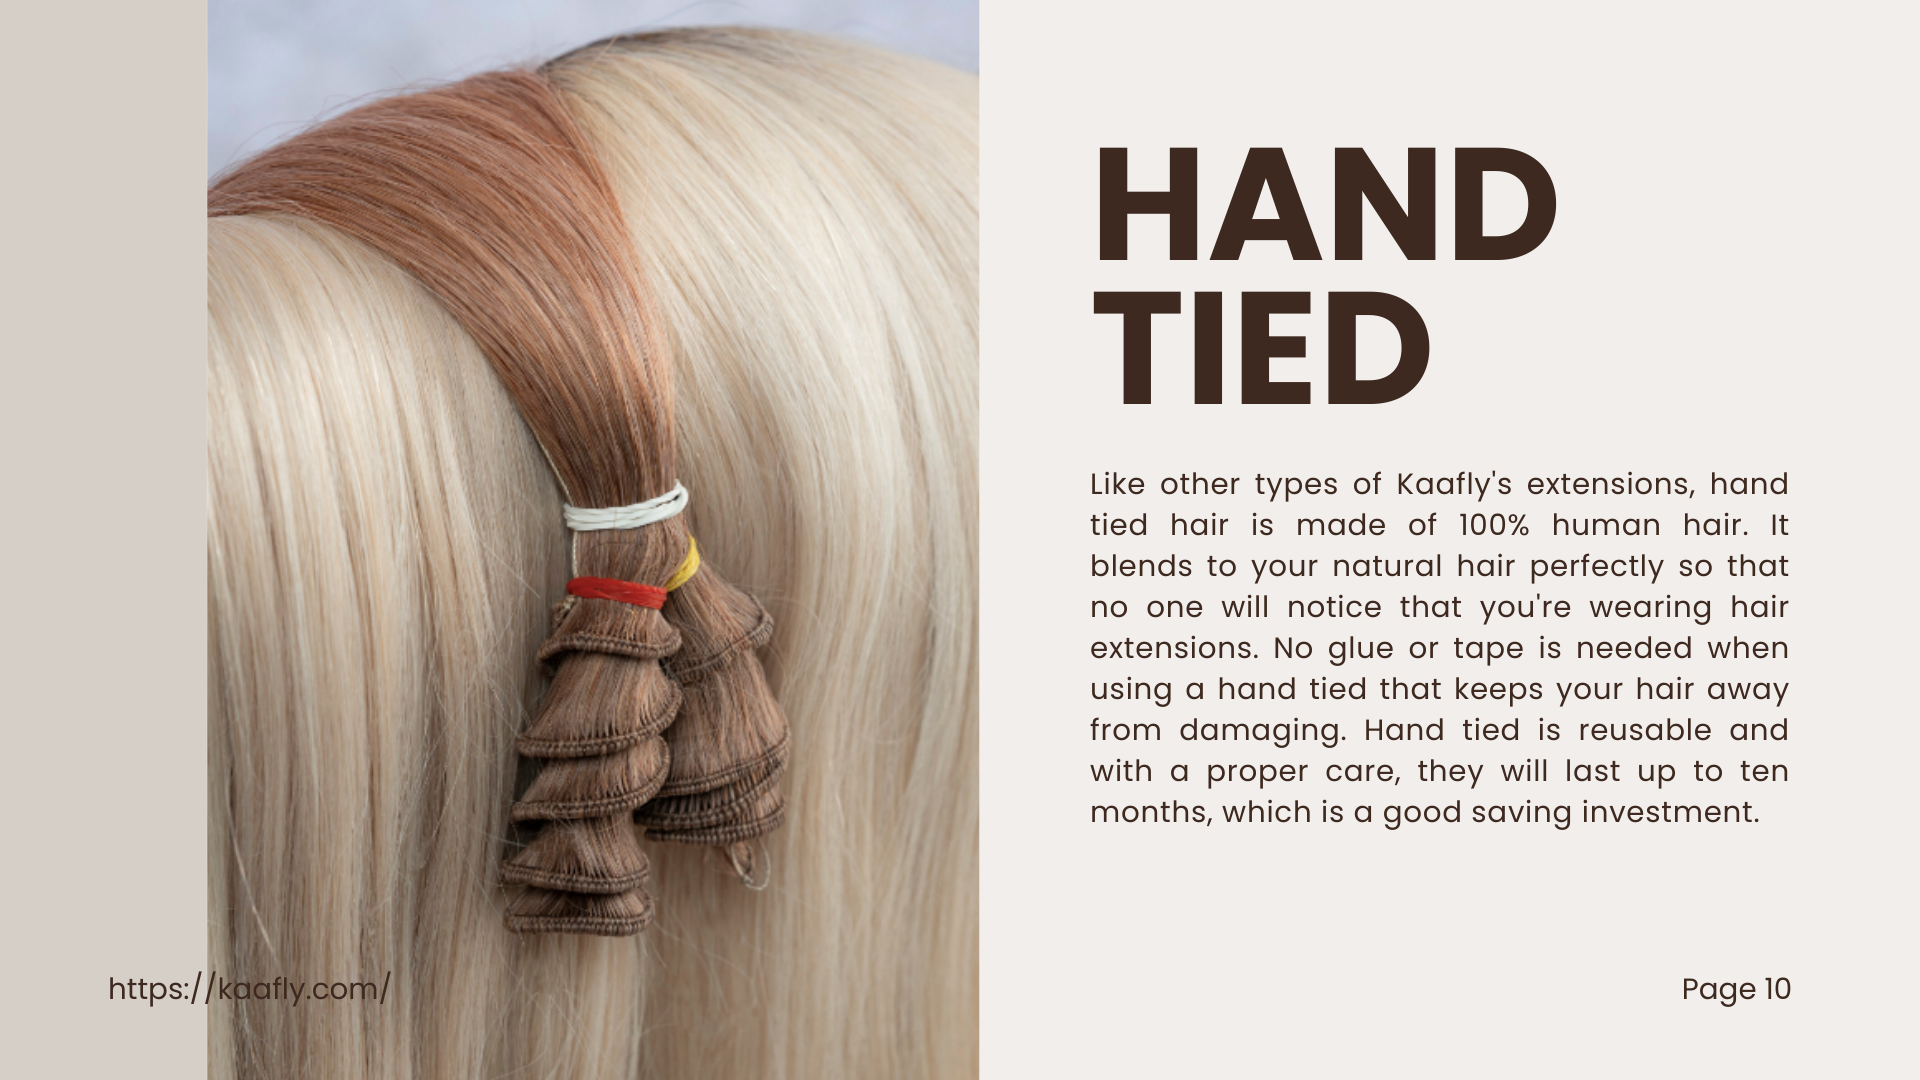 kaafly-hair-extensions